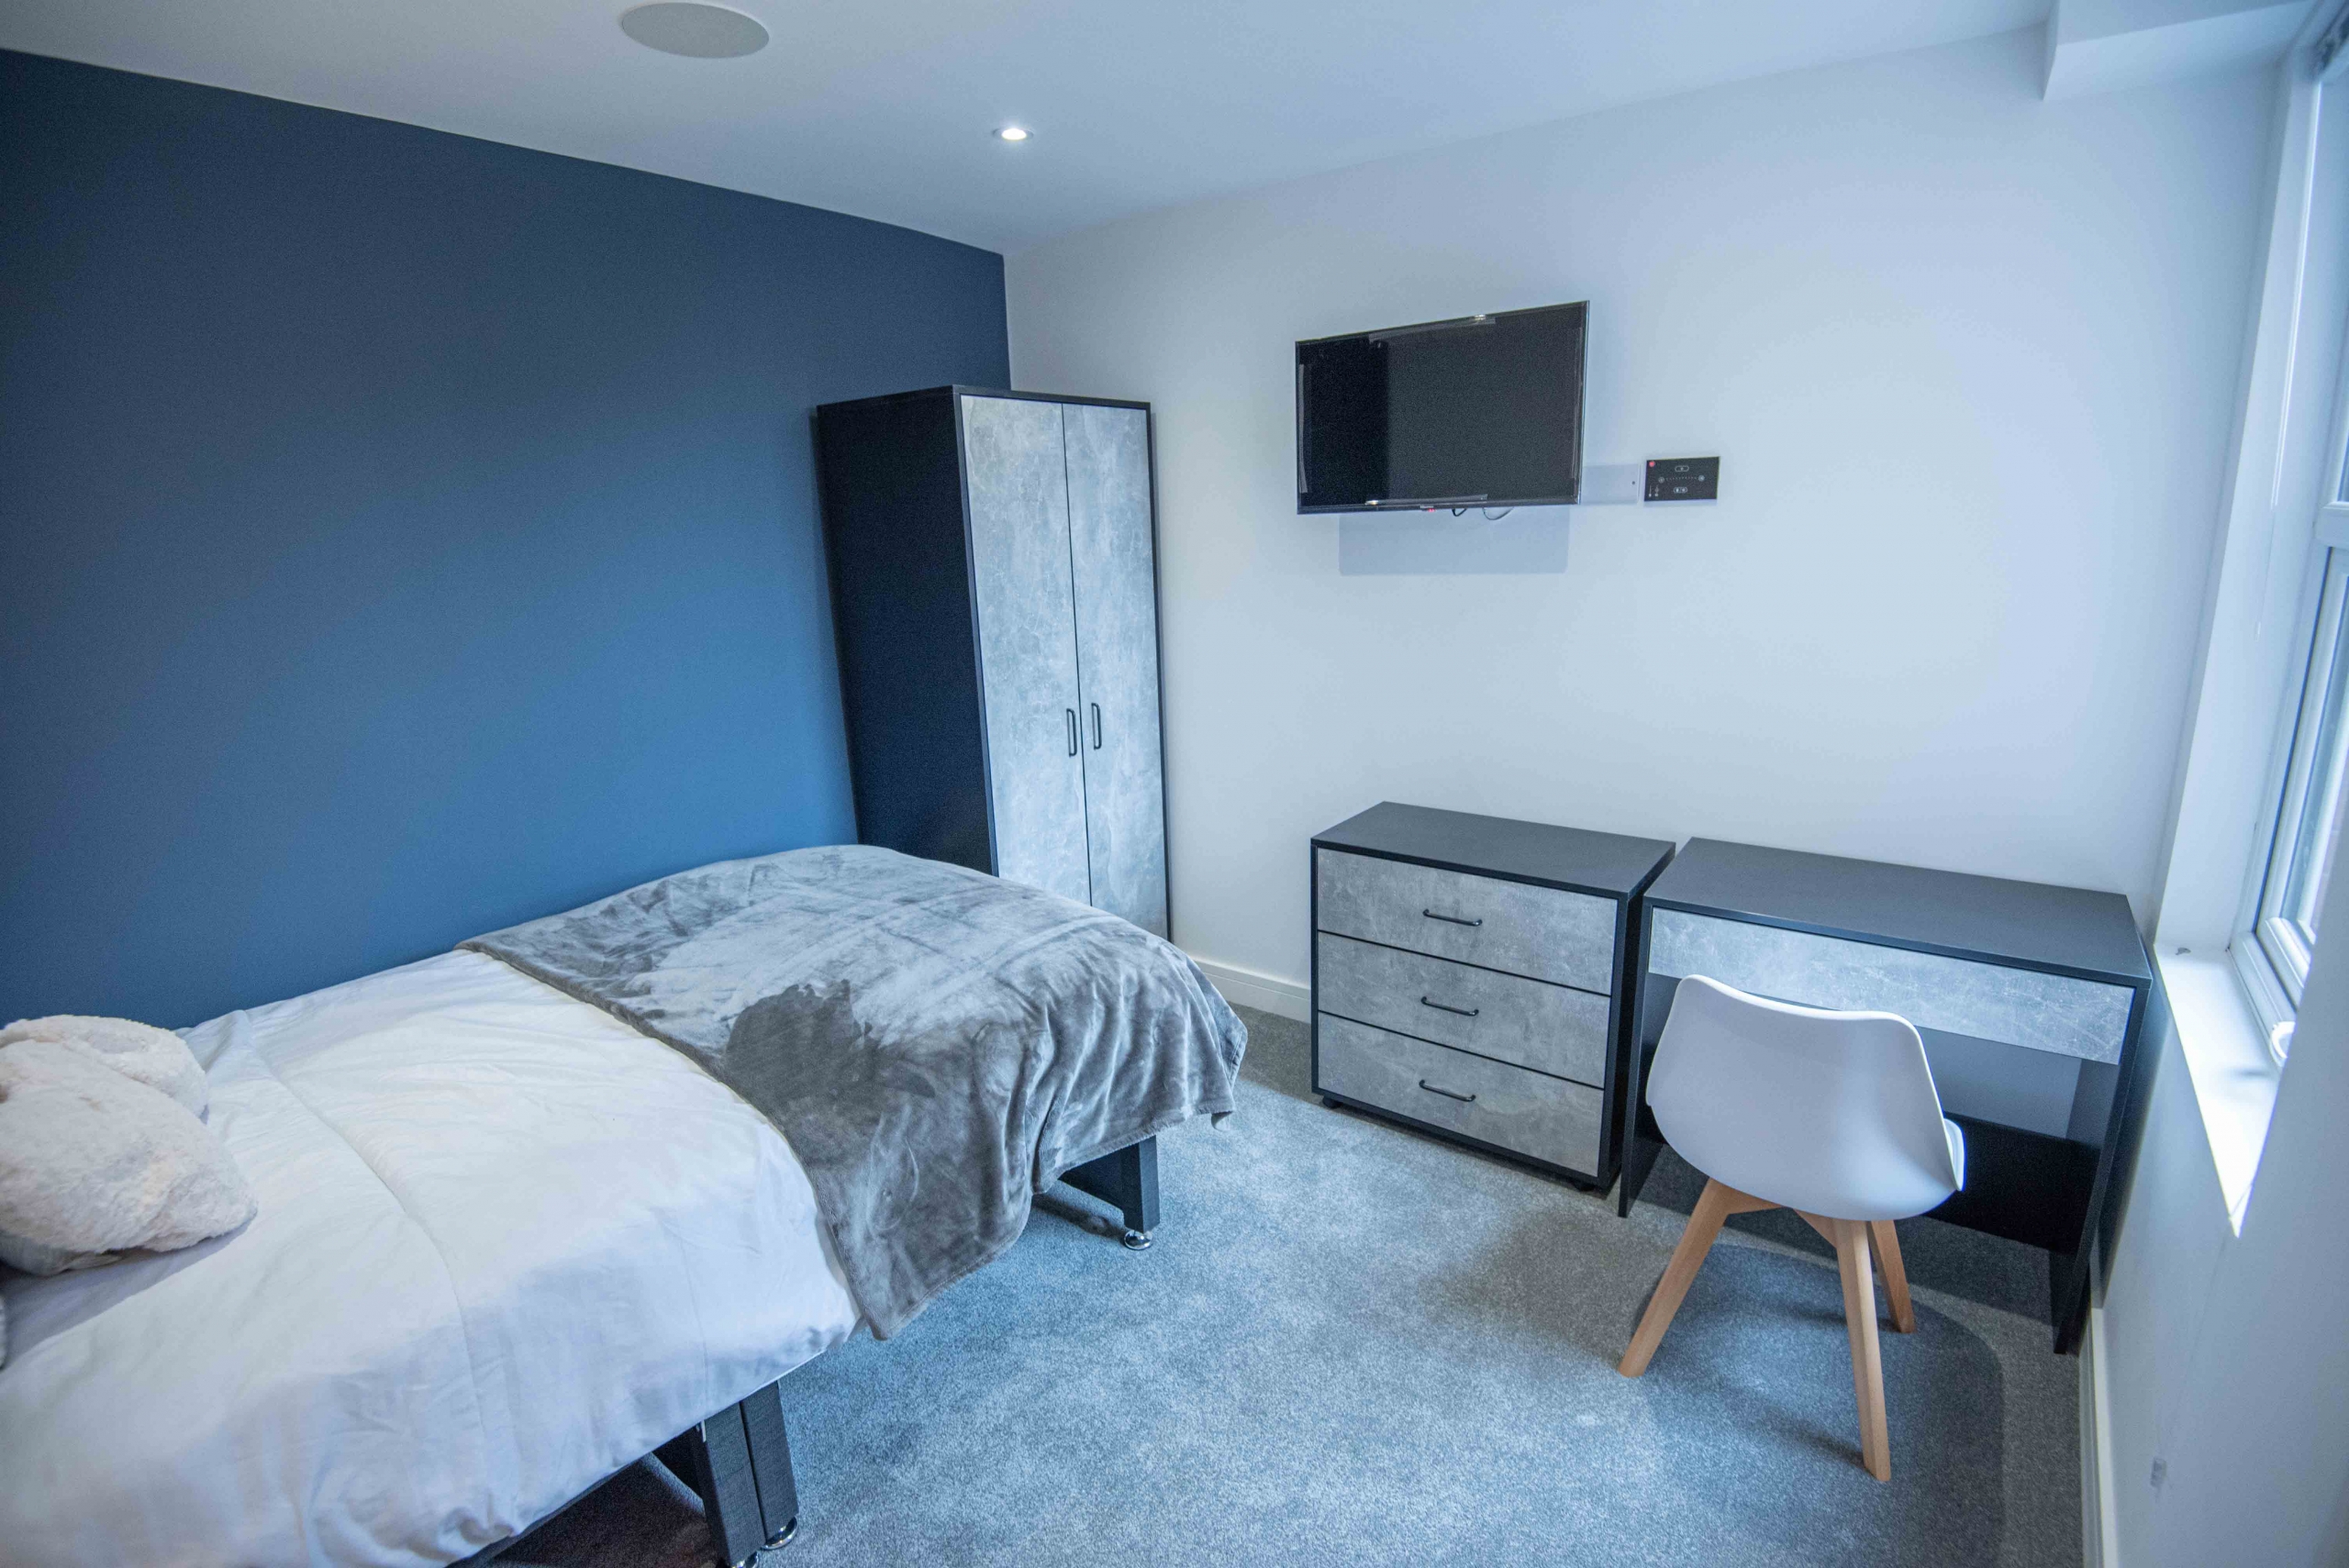 Student HMO Conversion Property Development by Applecore PDM in Southsea, Portsmouth in Hampshire